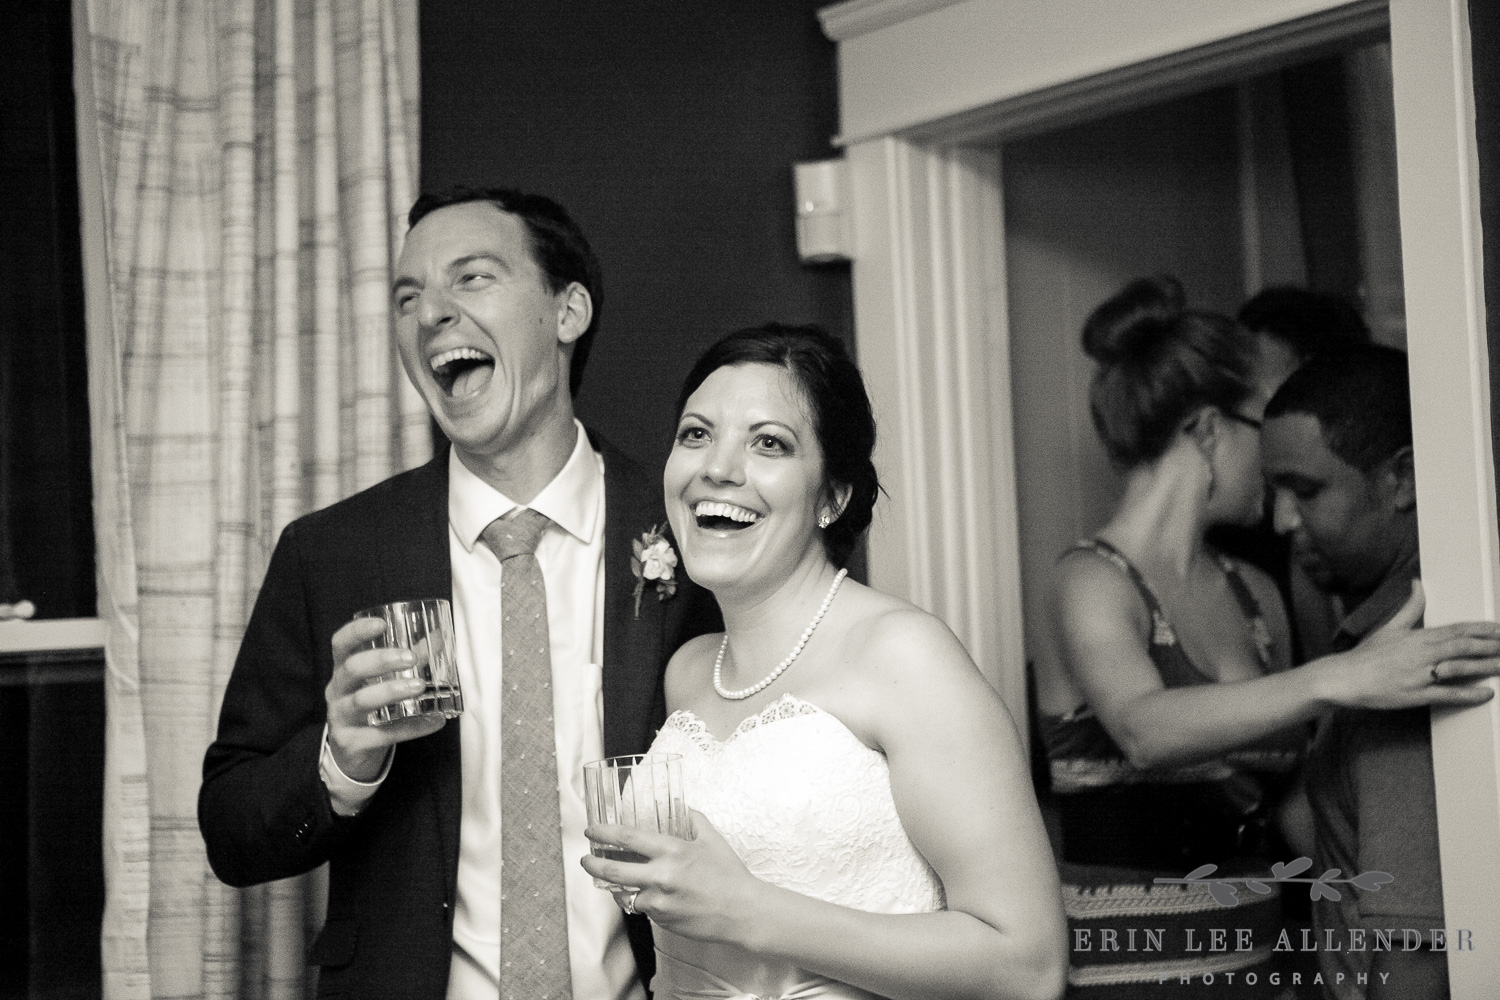 Bride_Groom_Laugh_at_Toasts